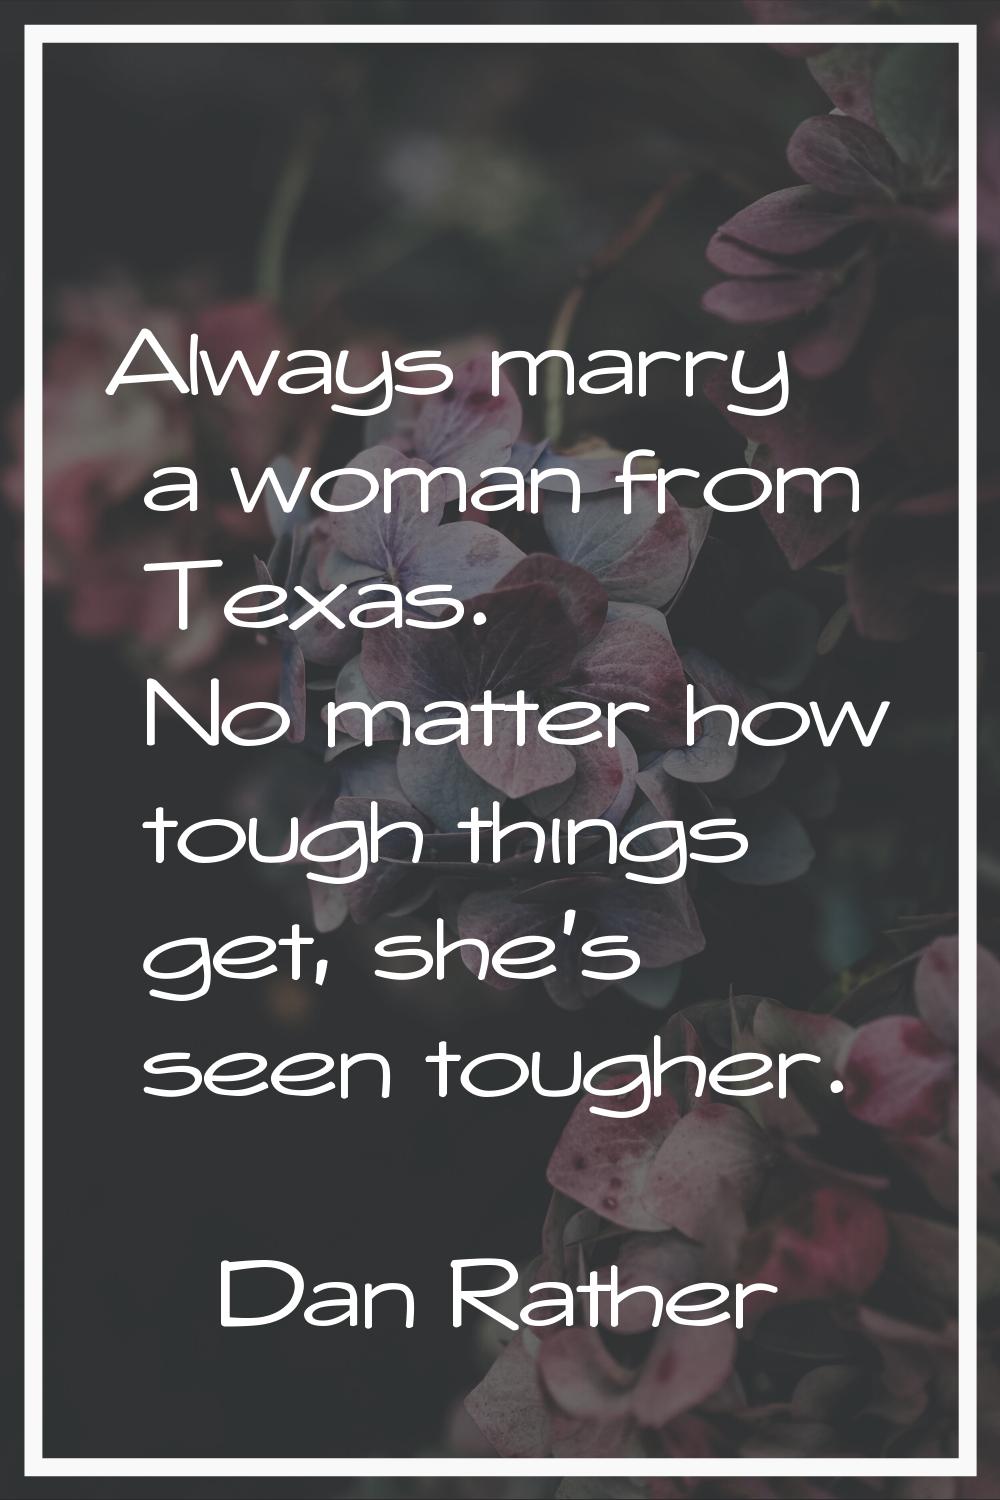 Always marry a woman from Texas. No matter how tough things get, she's seen tougher.